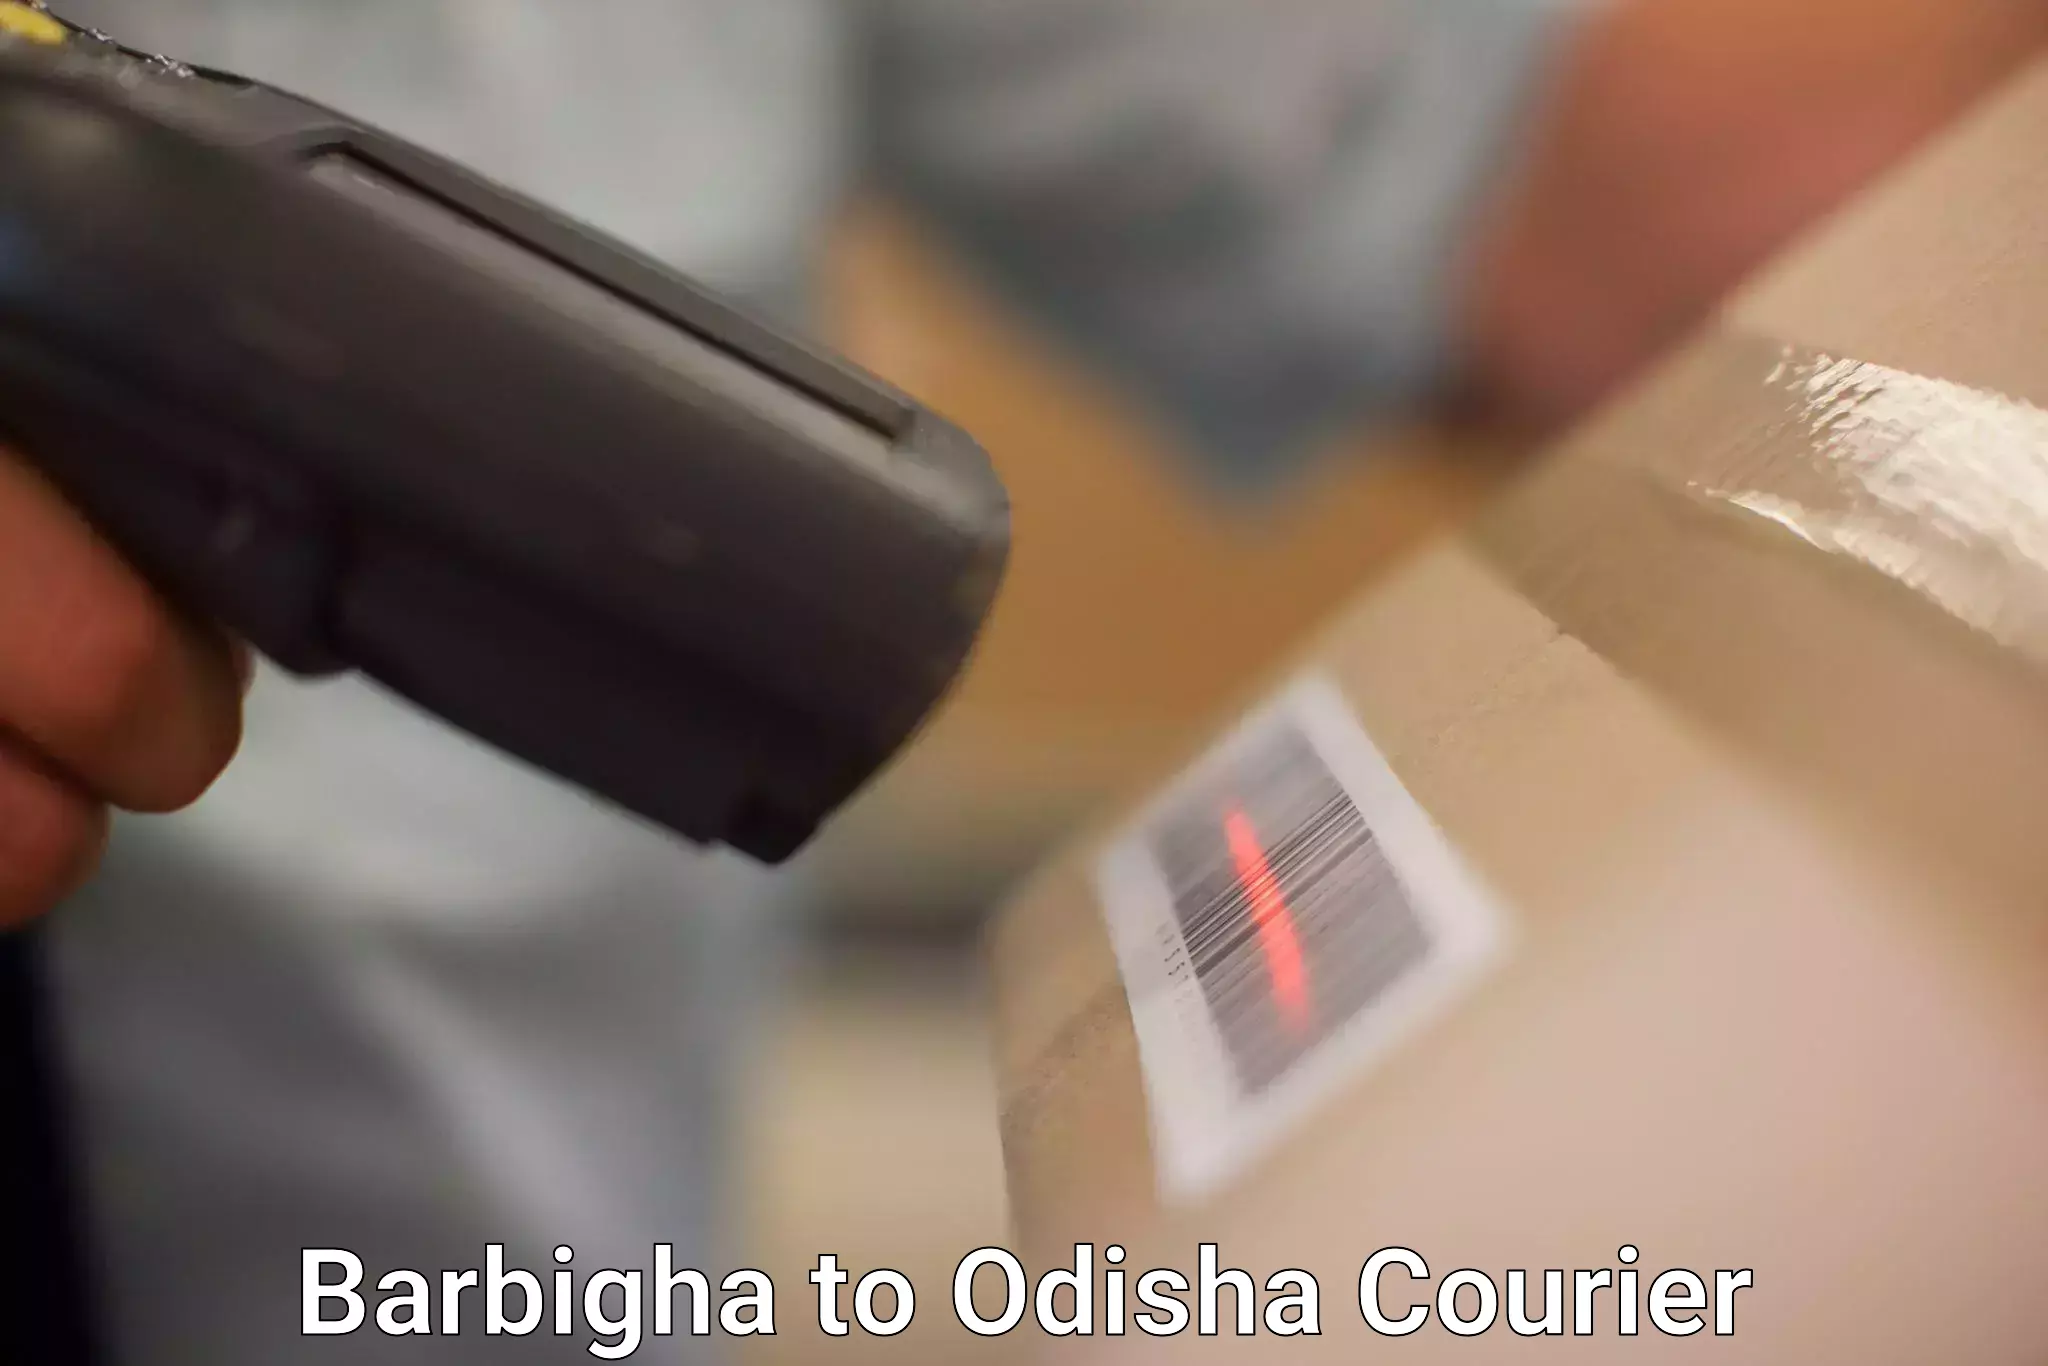 Reliable delivery network Barbigha to Udala